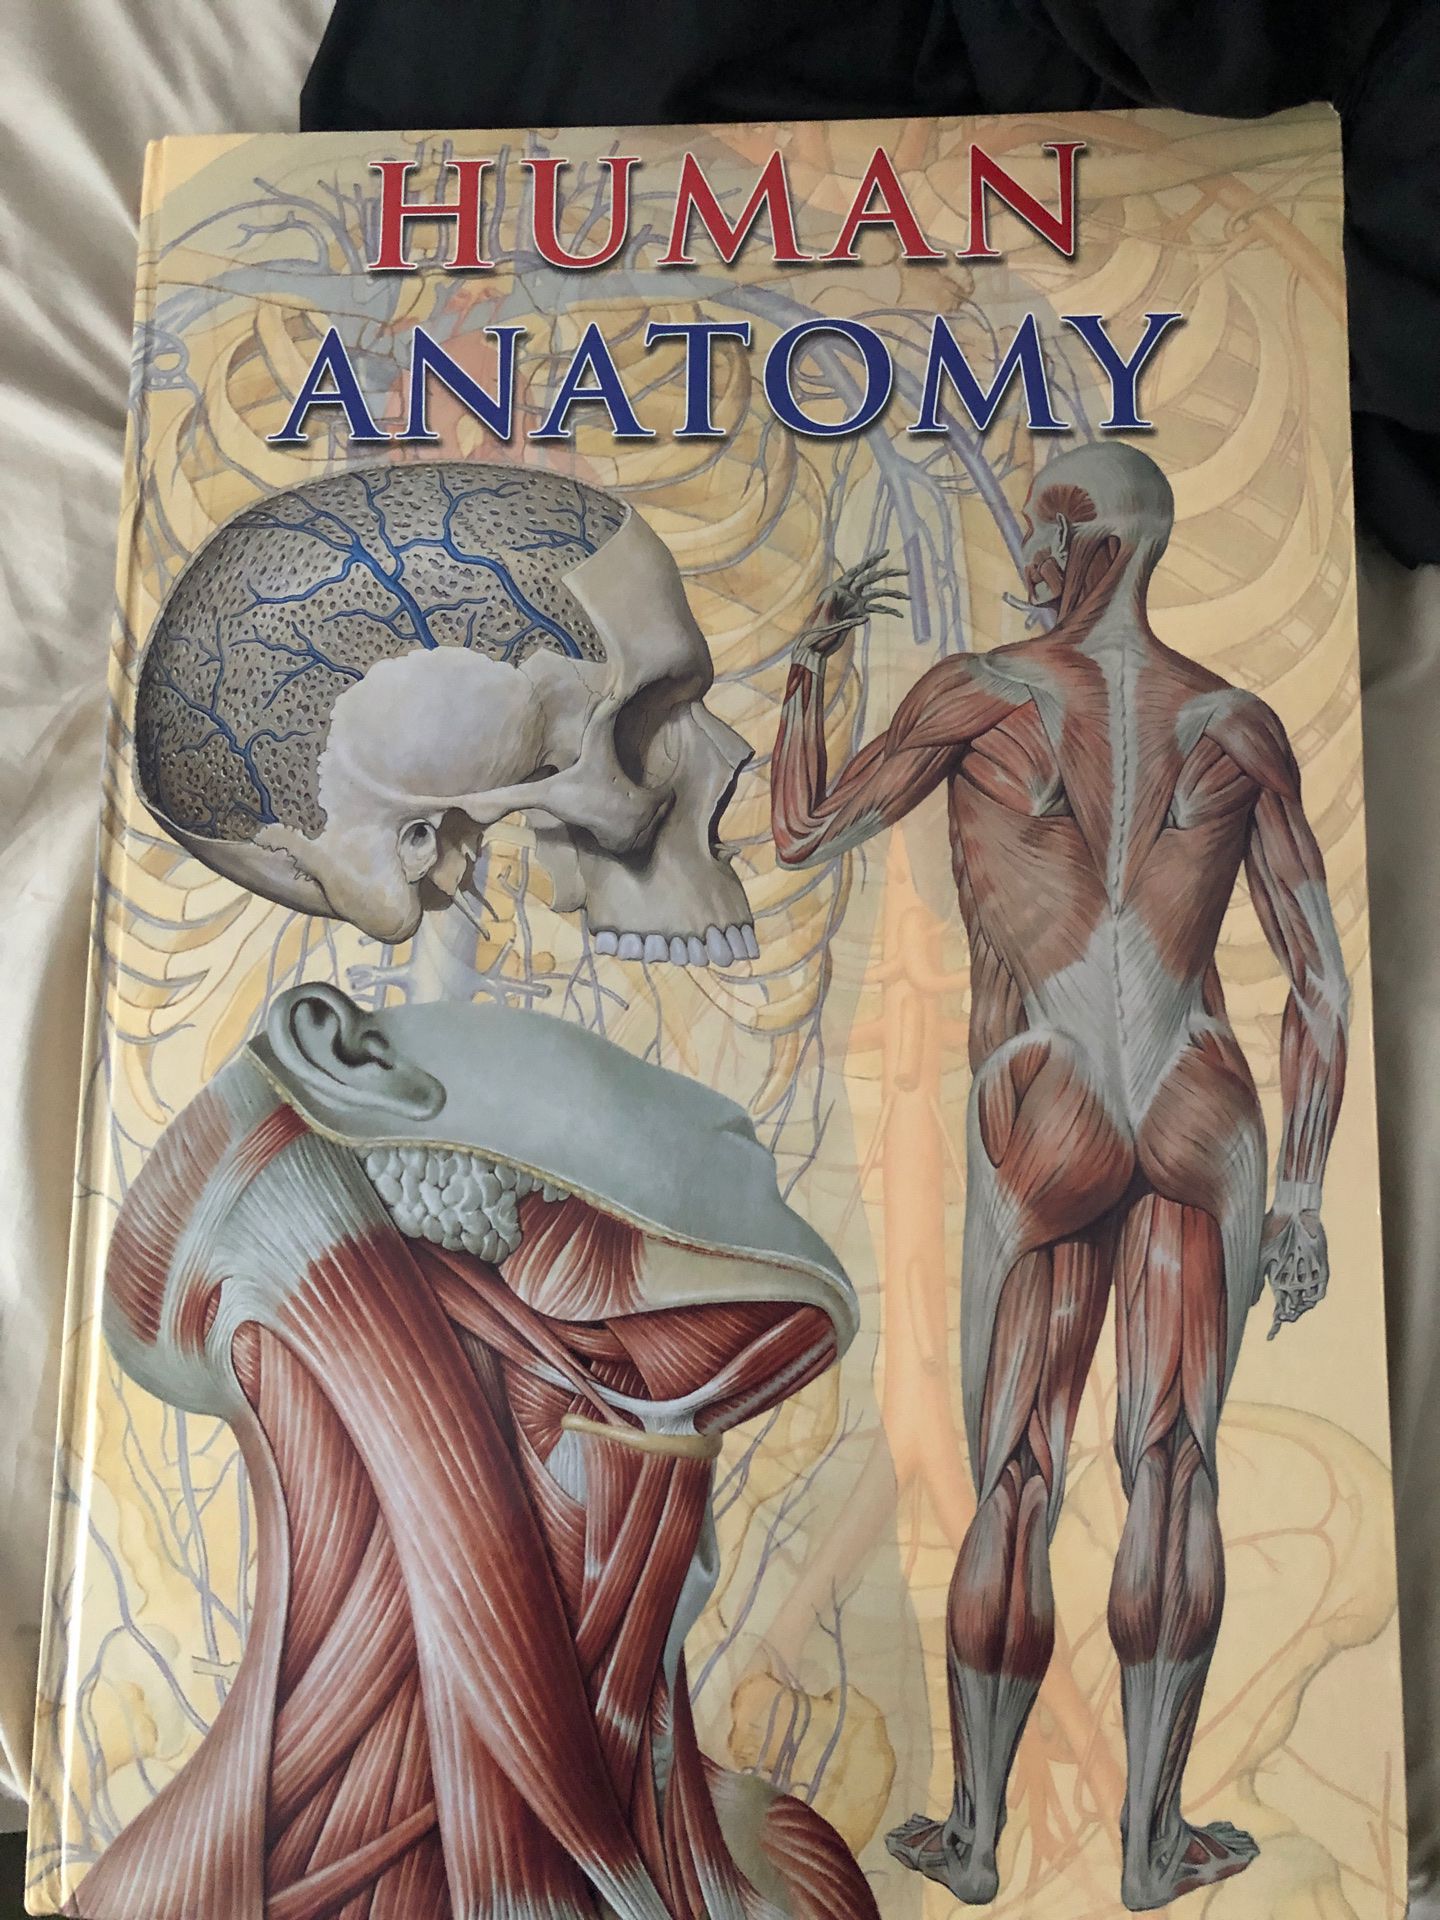 Human anatomy big book 14 by 20 inches